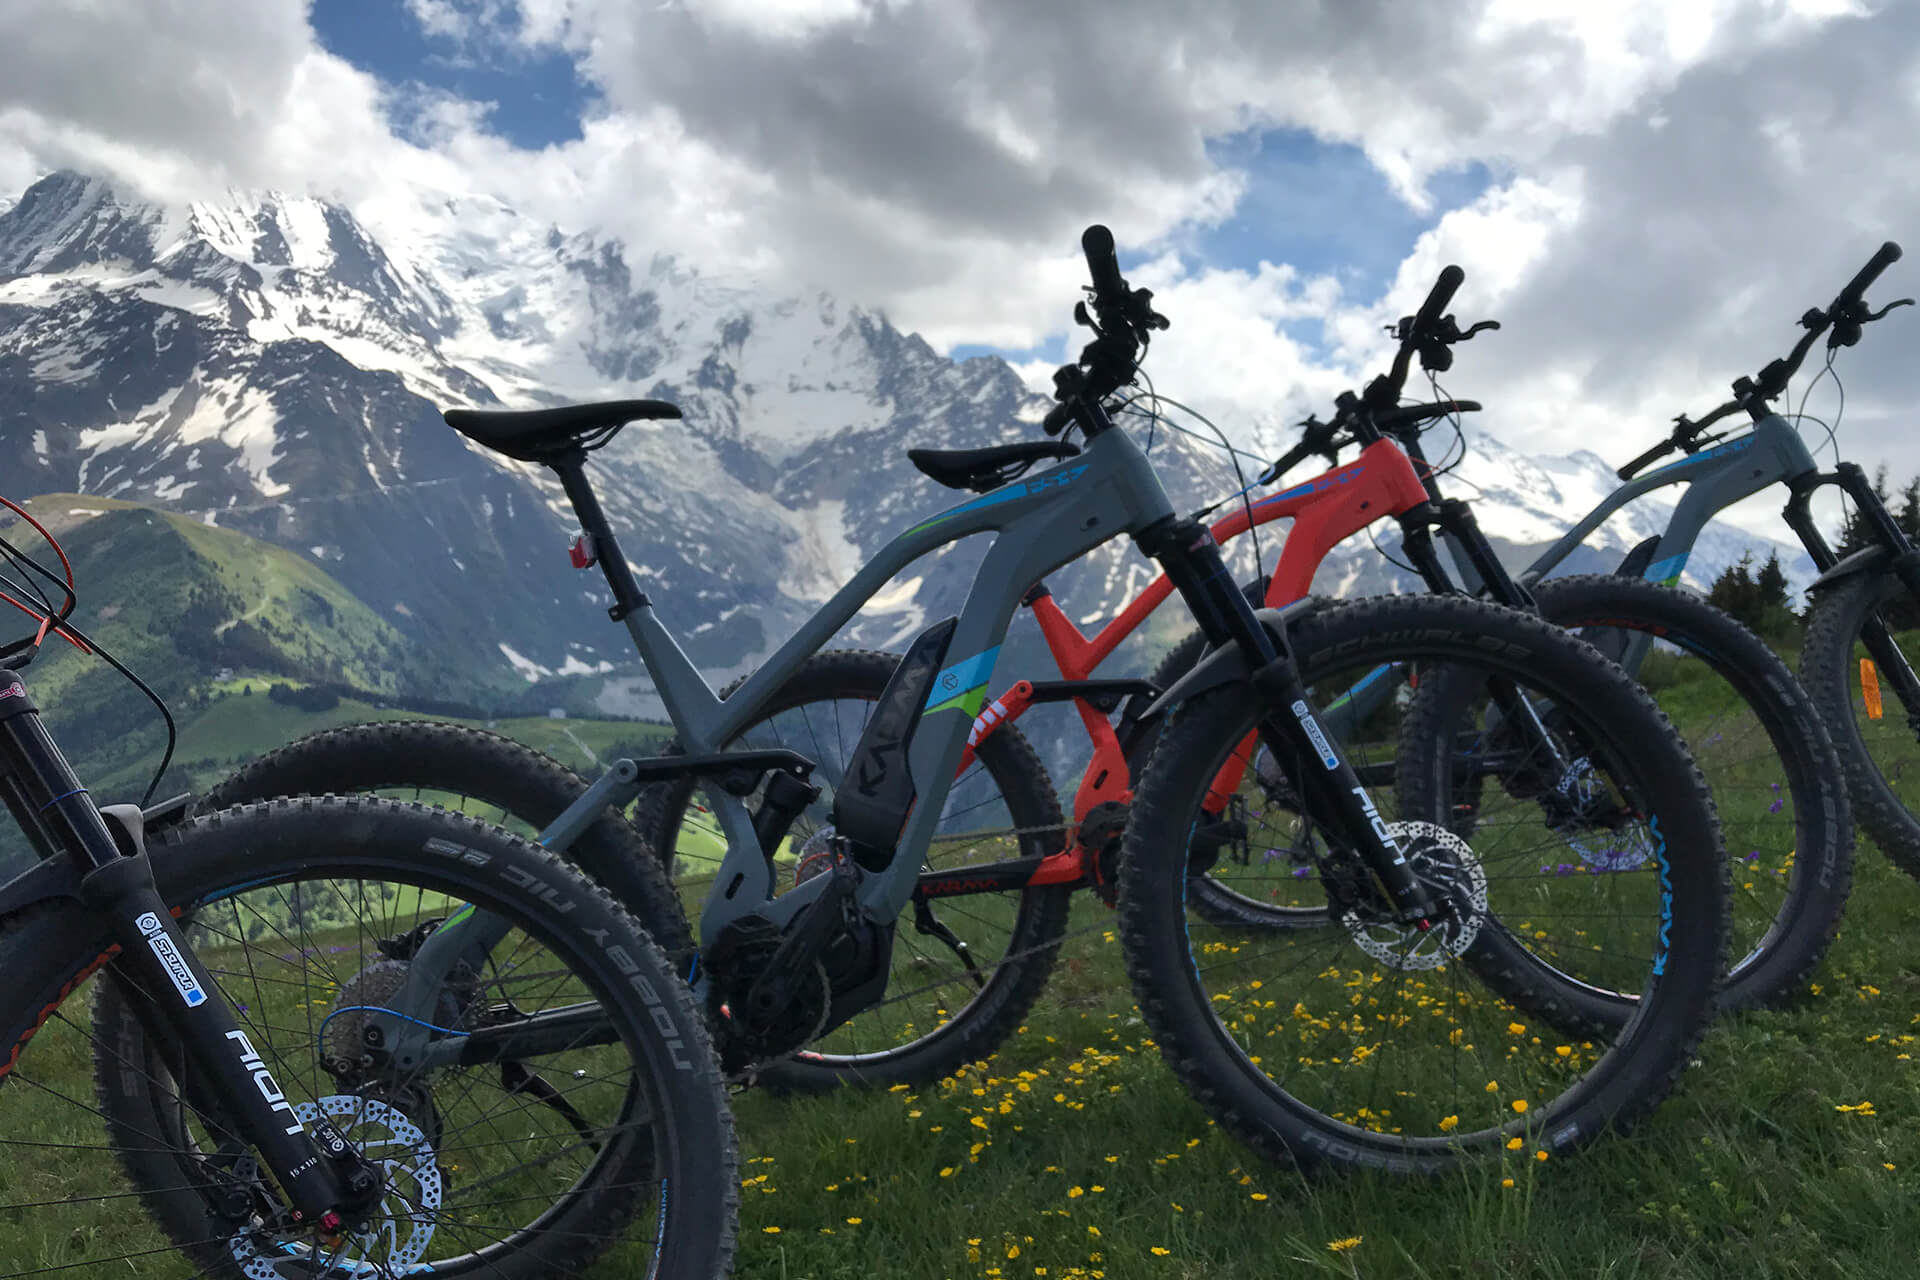 How to choose a rental bike for a mountain excursion in France